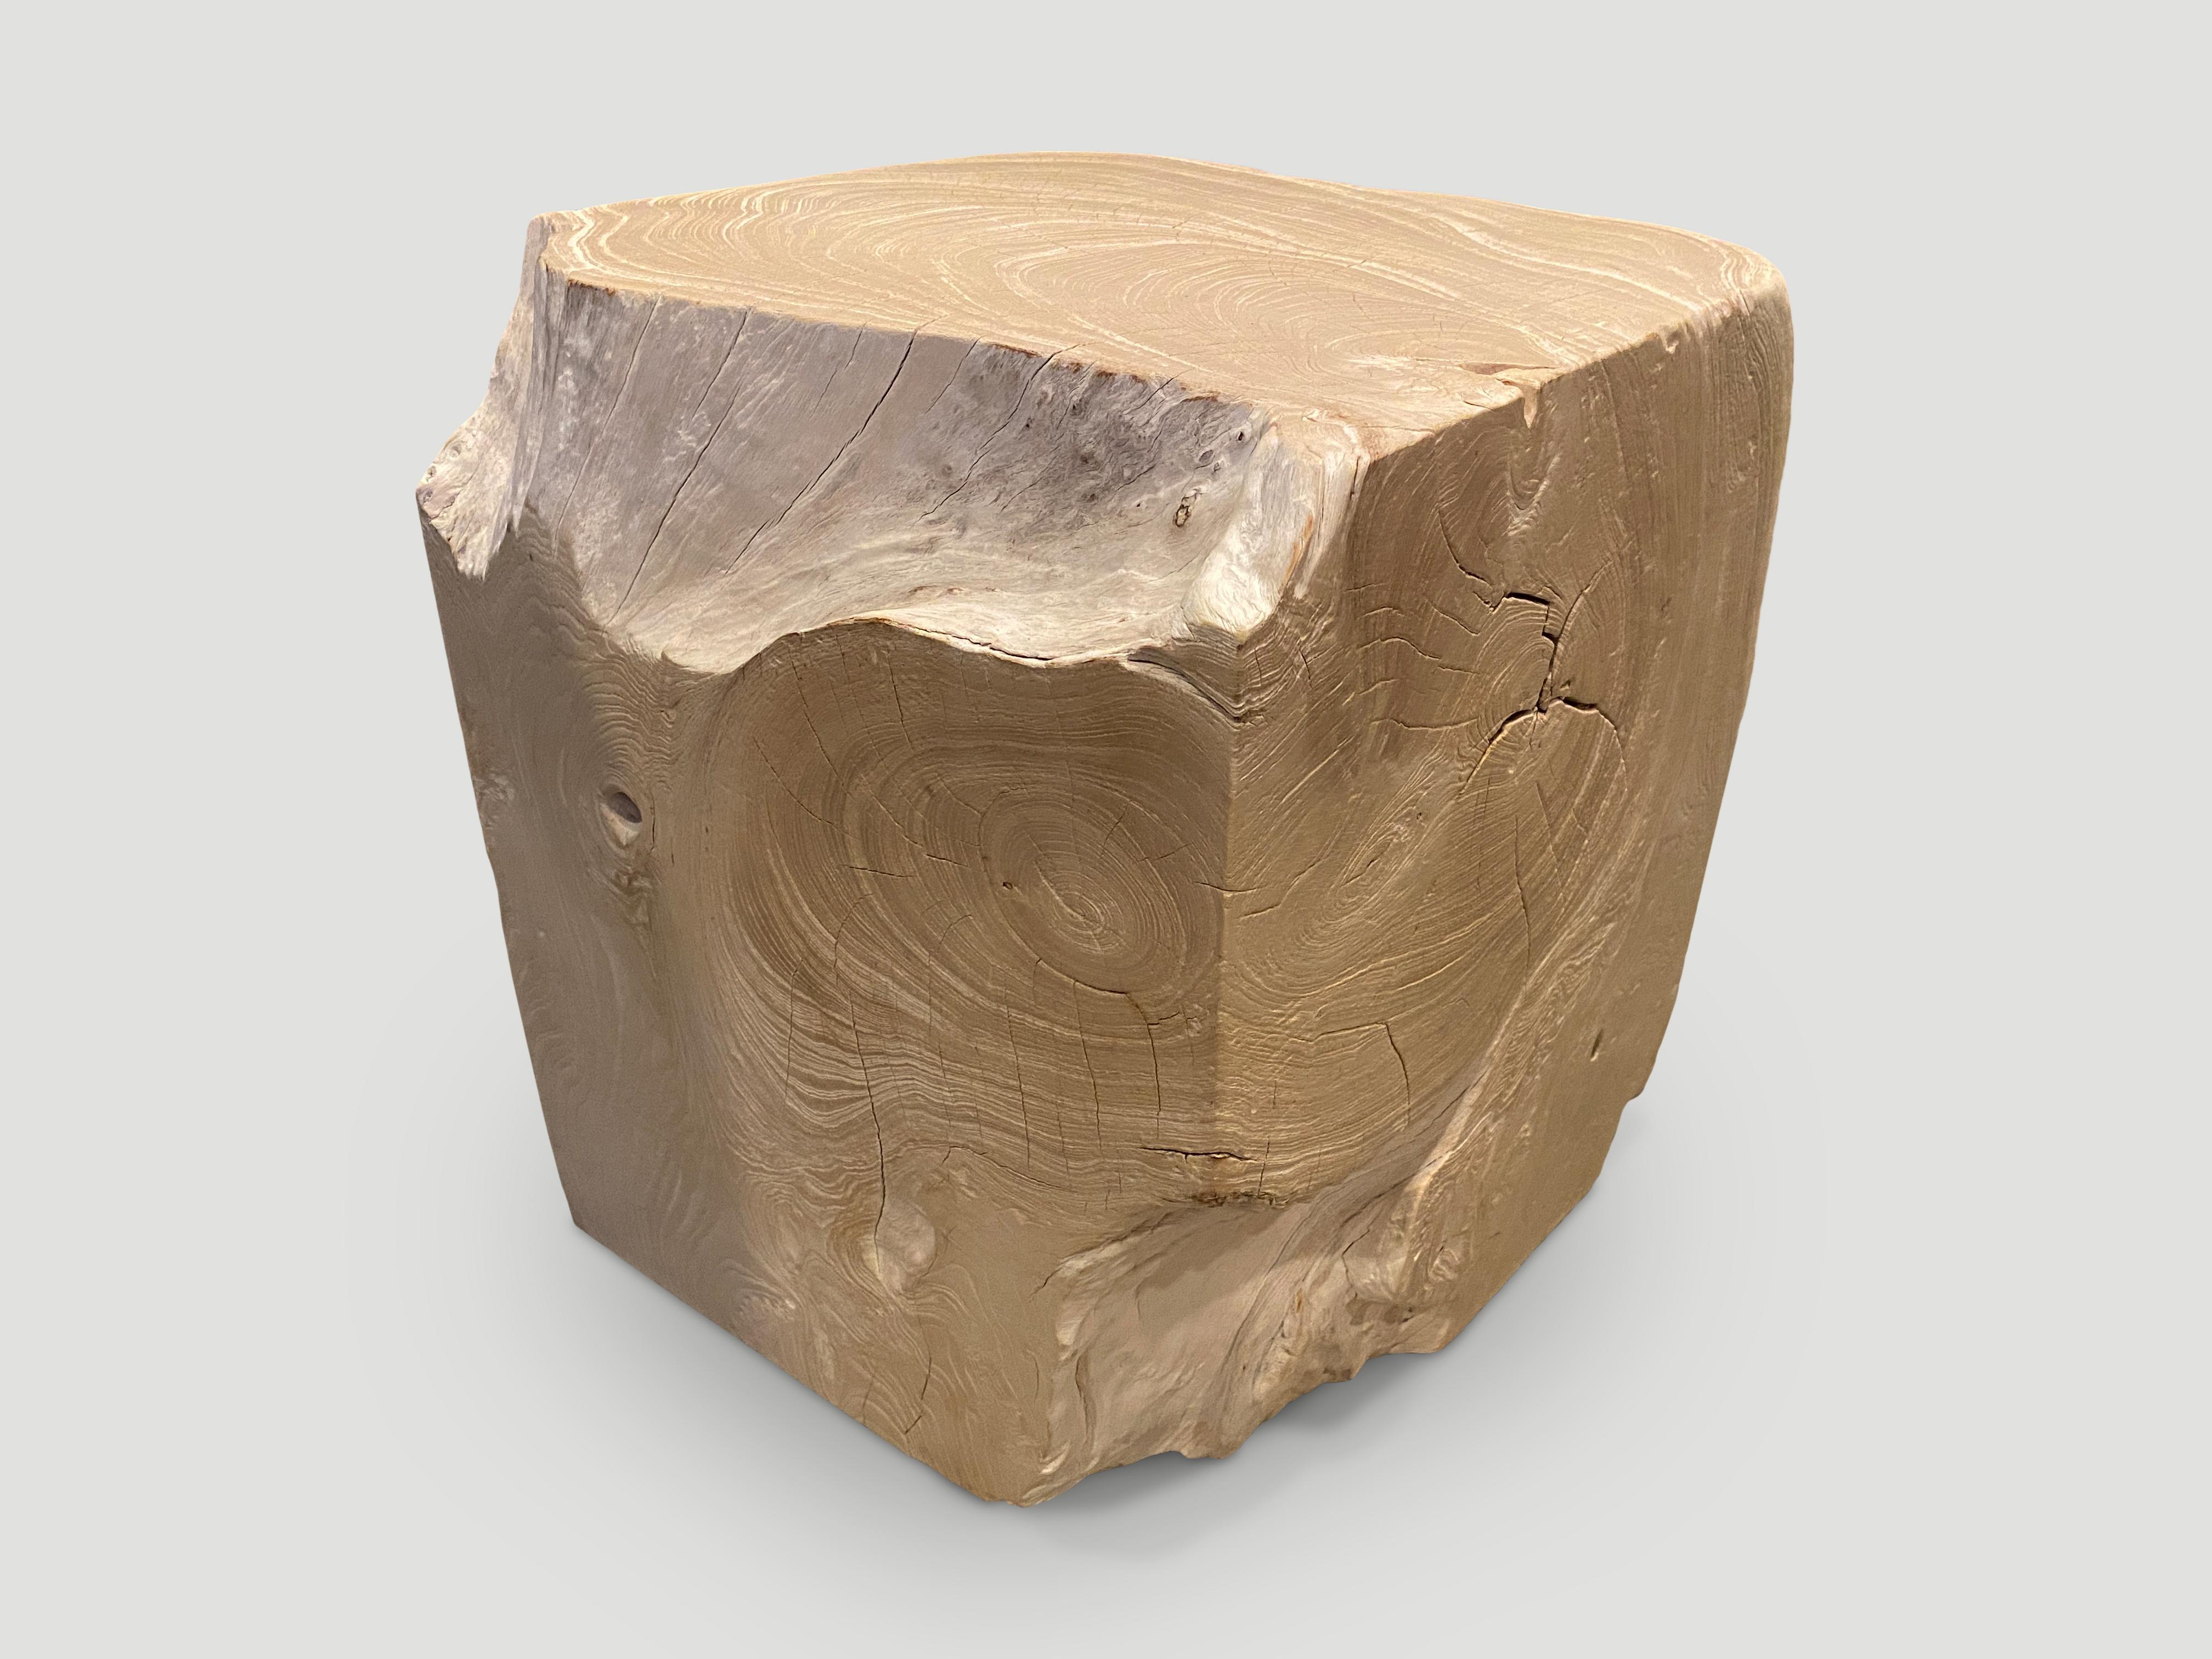 Beautiful bleached teak side table that is both sculptural and usable. We added a shellac to the smooth sections and left the more organic section raw in contrast. Organic is the new modern.

The St. Barts Collection features an exciting line of